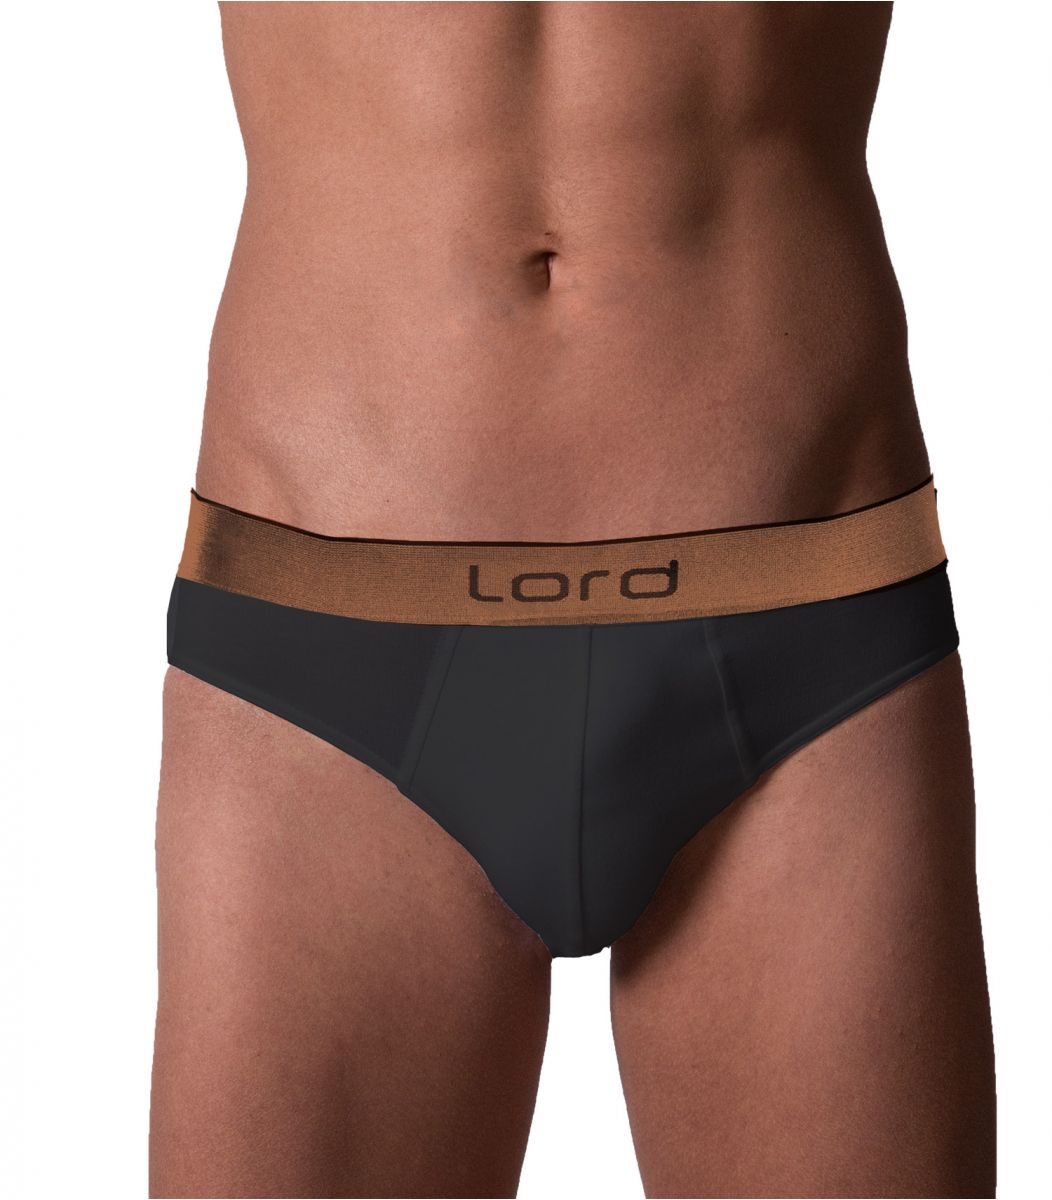 Lord Men Brief Shine rubber band, cotton Lord - 3